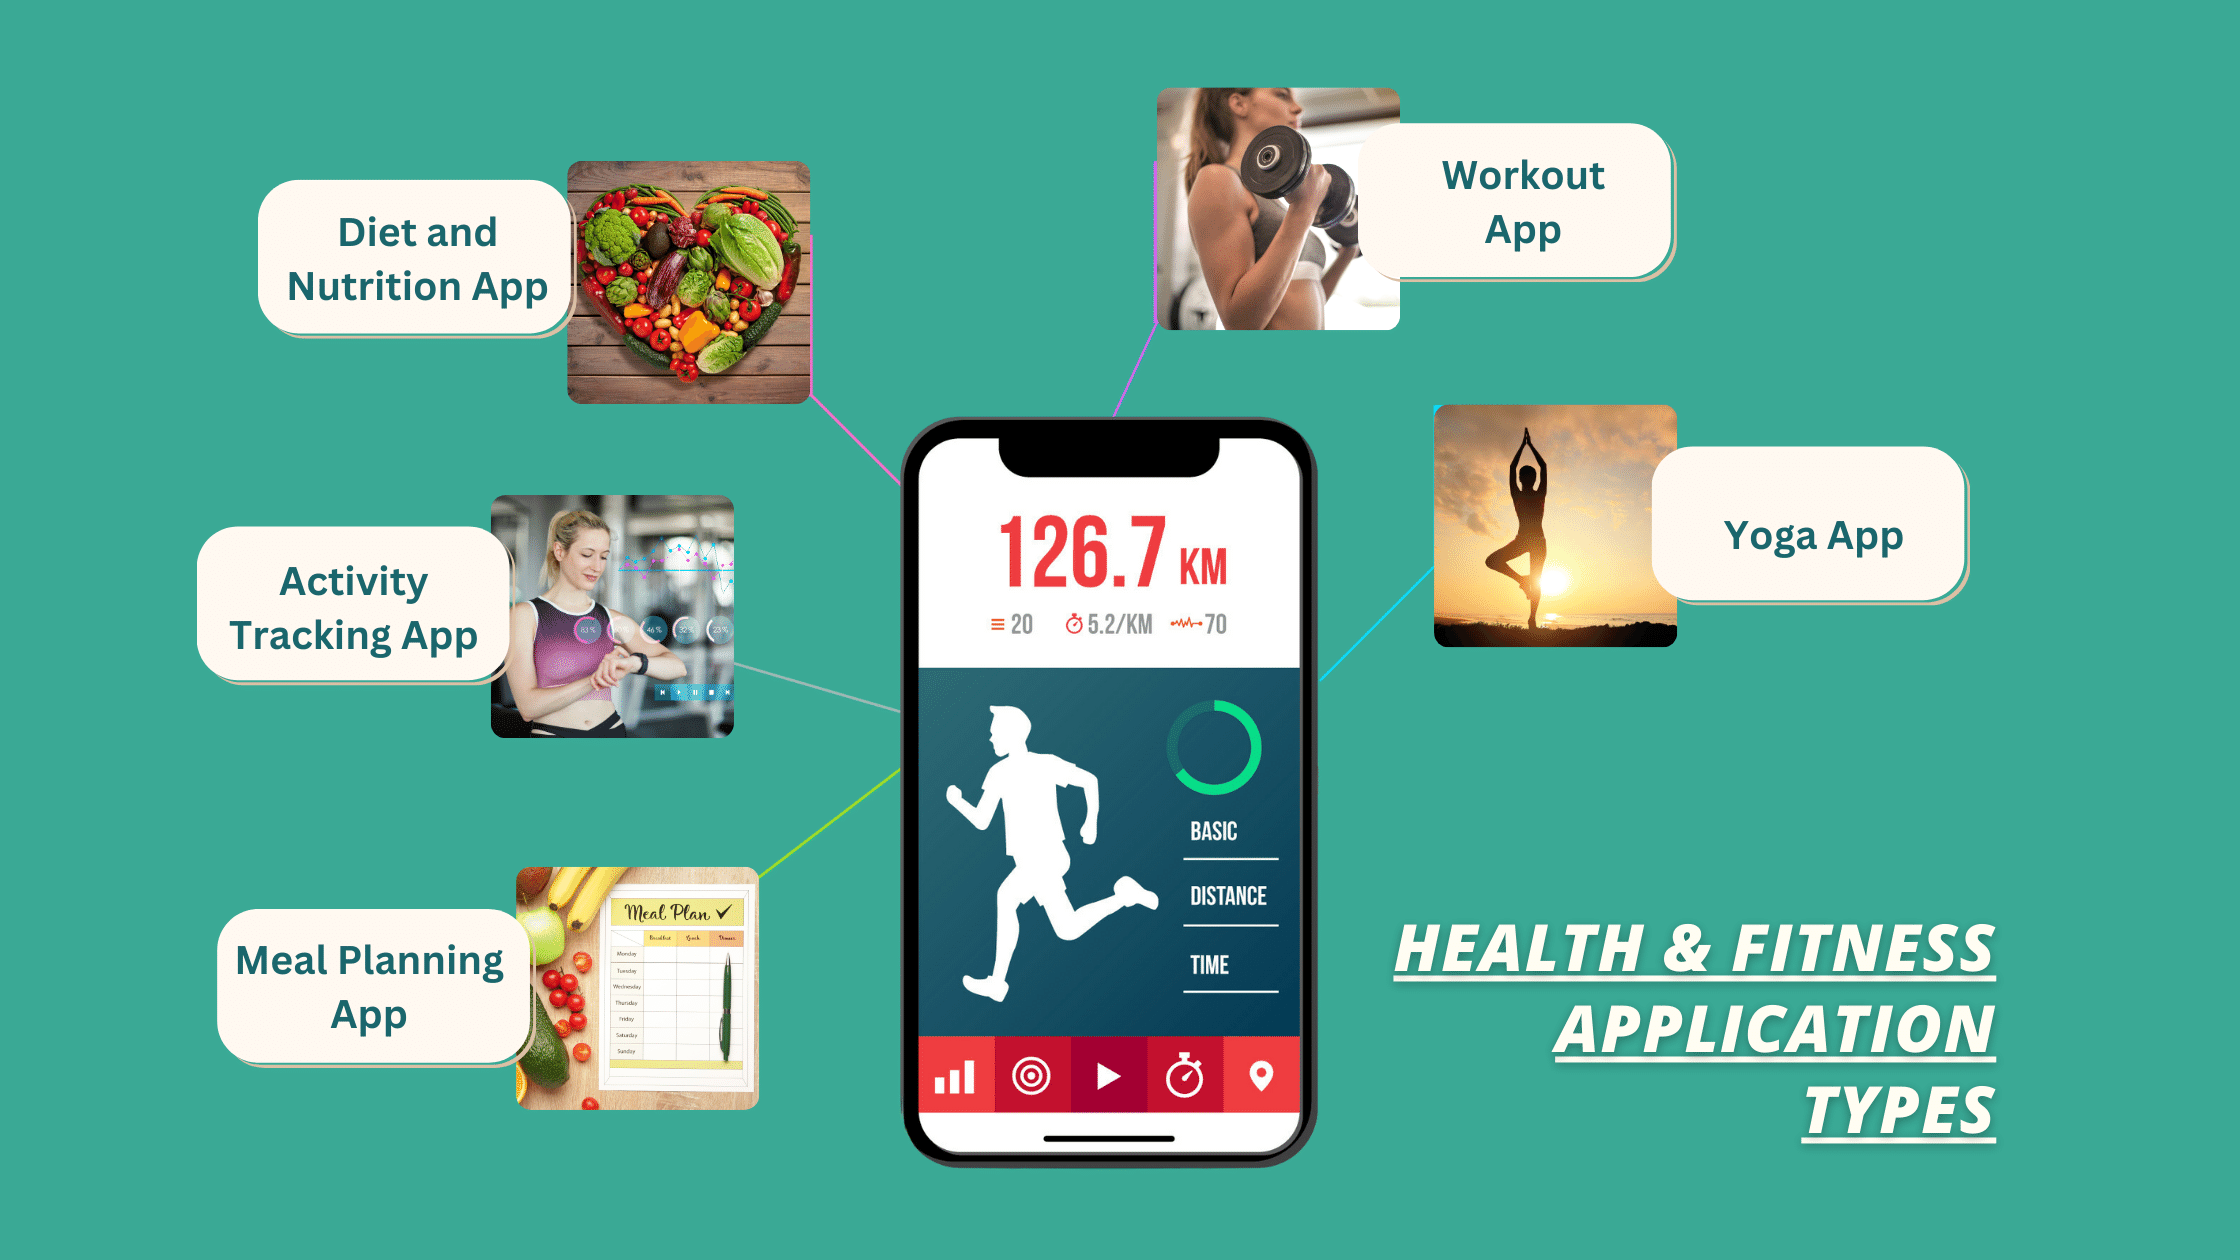 Health & Fitness Application Types